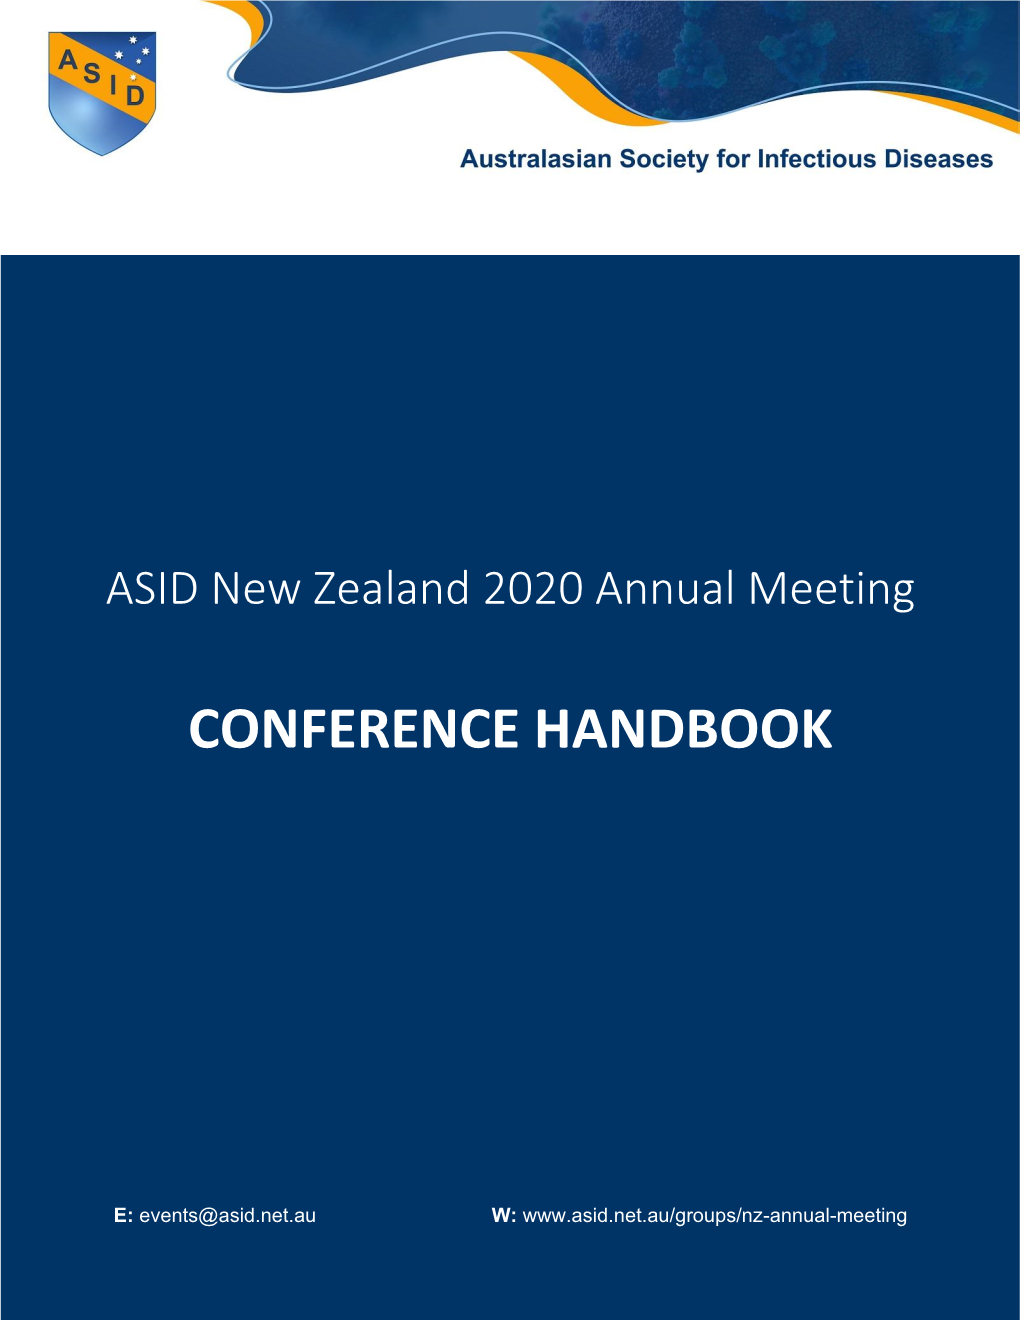 ASID New Zealand 020 Annual Meeting